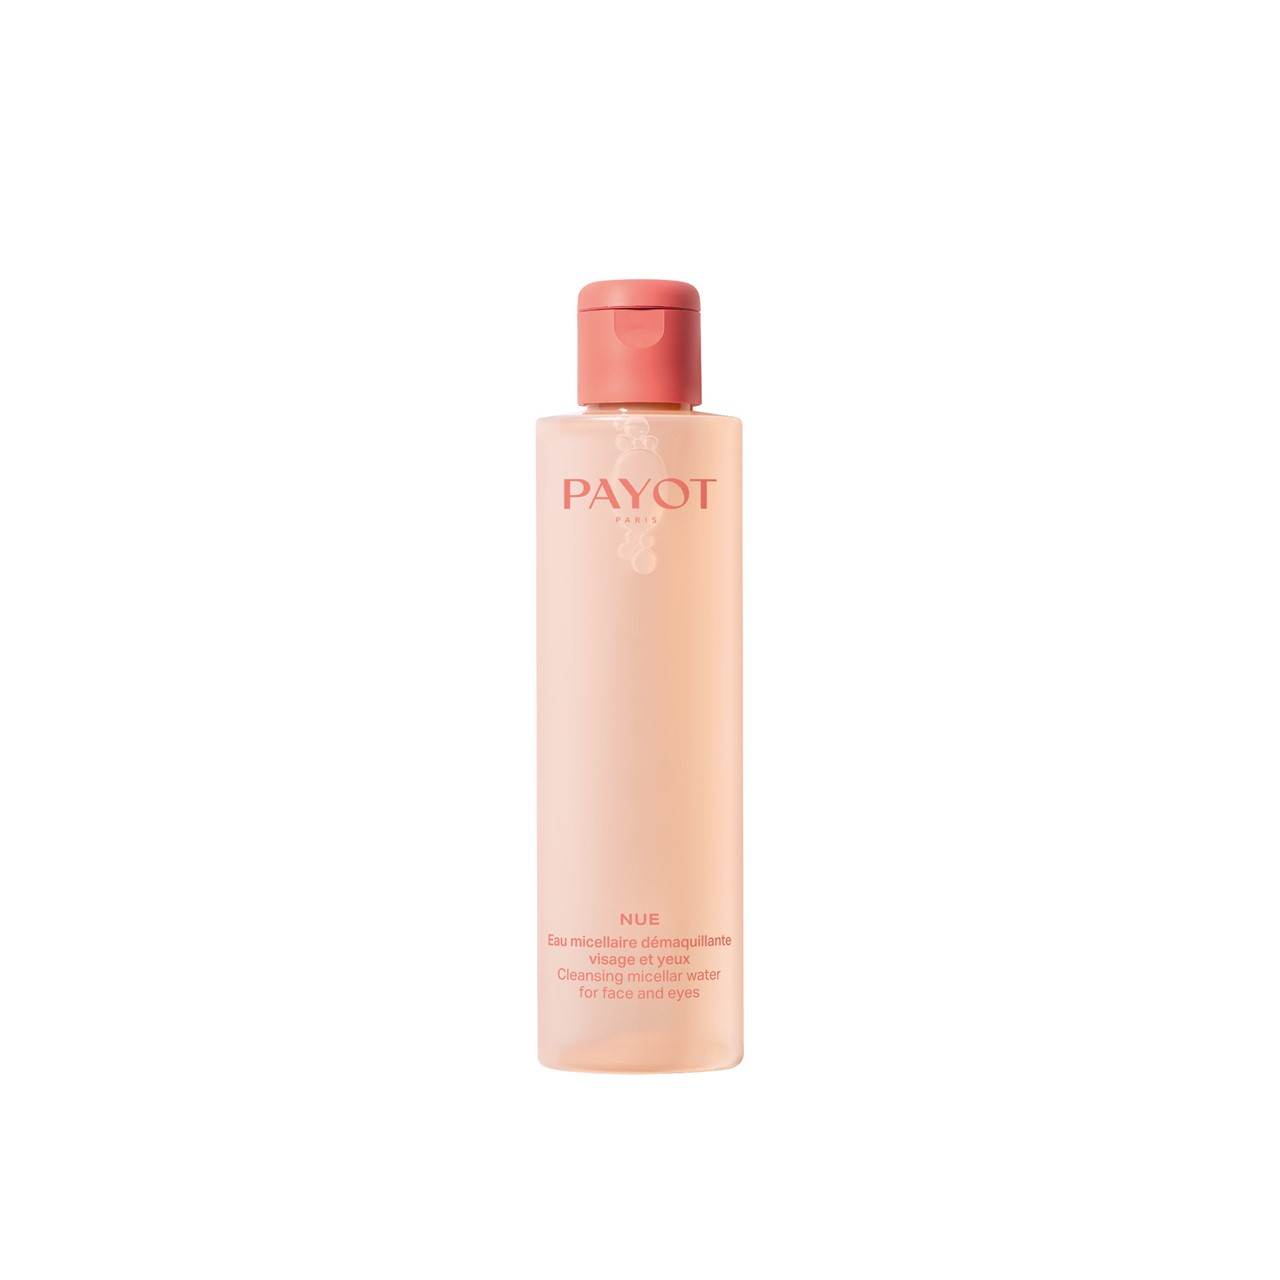 Payot Nue Cleansing Micellar Water For Face And Eyes 200ml (6.7 fl oz)